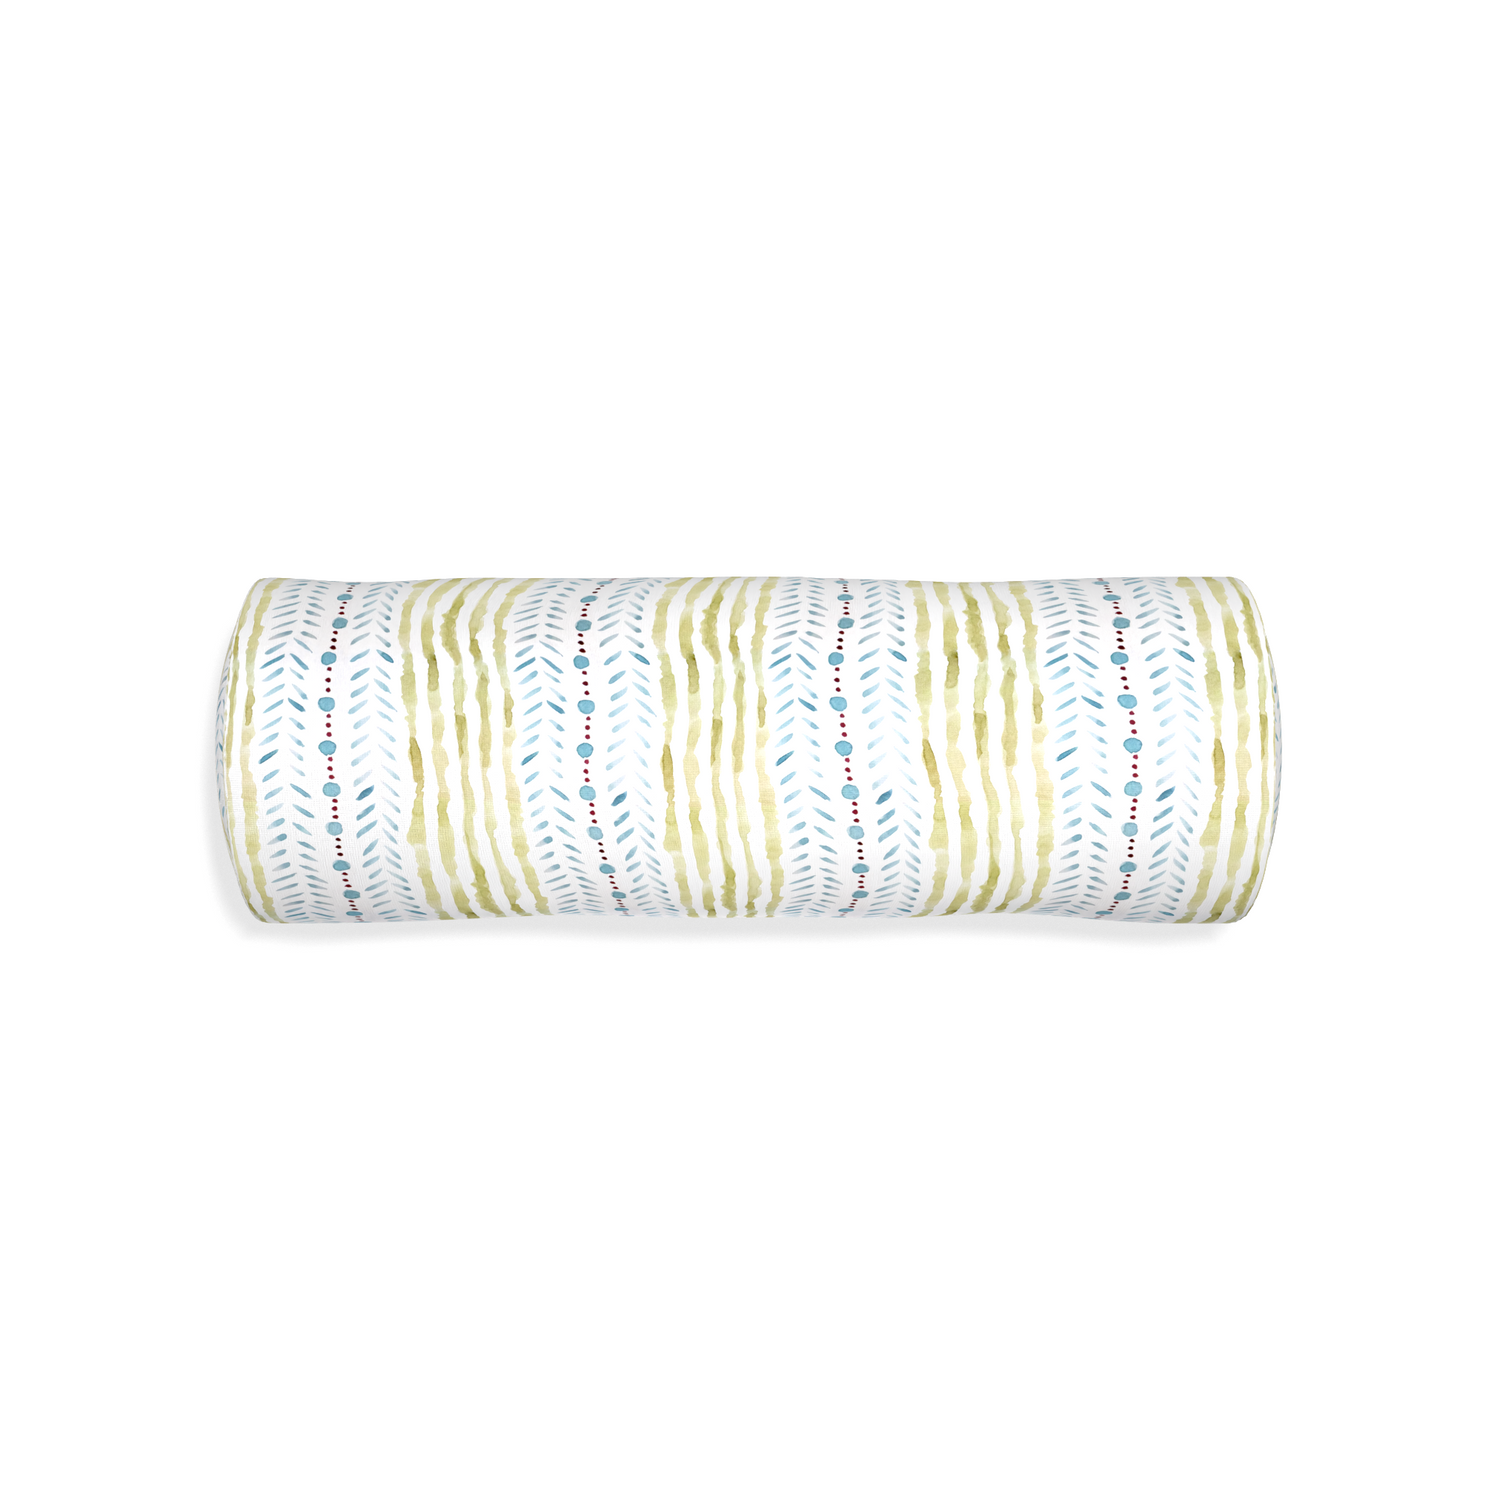 Bolster julia custom blue & green stripedpillow with none on white background